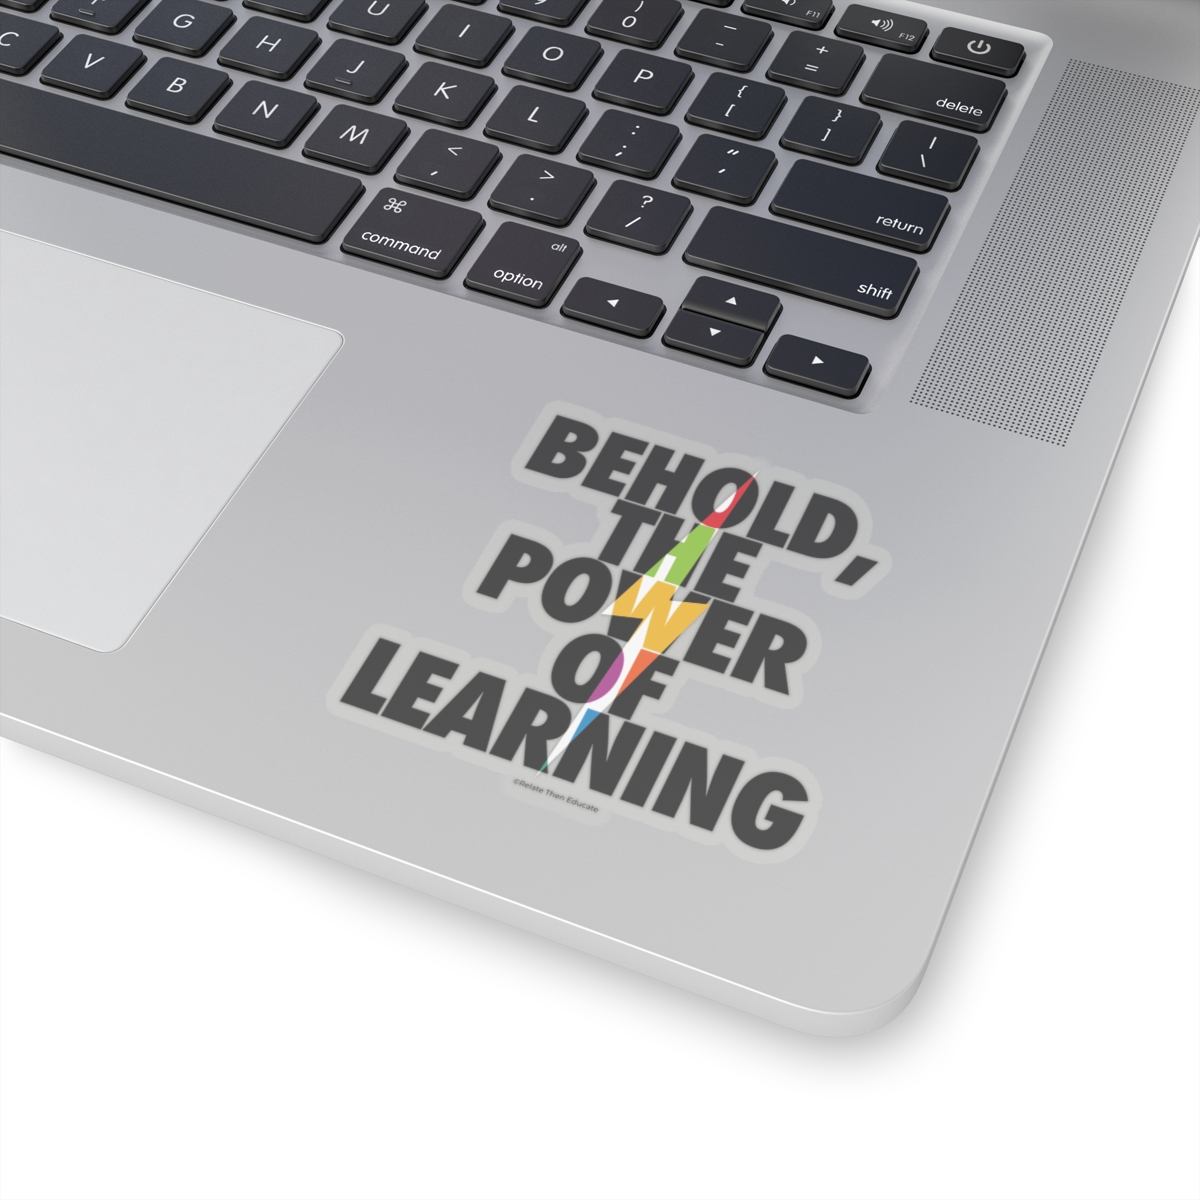 The Power of Learning Stickers for Teachers product thumbnail image